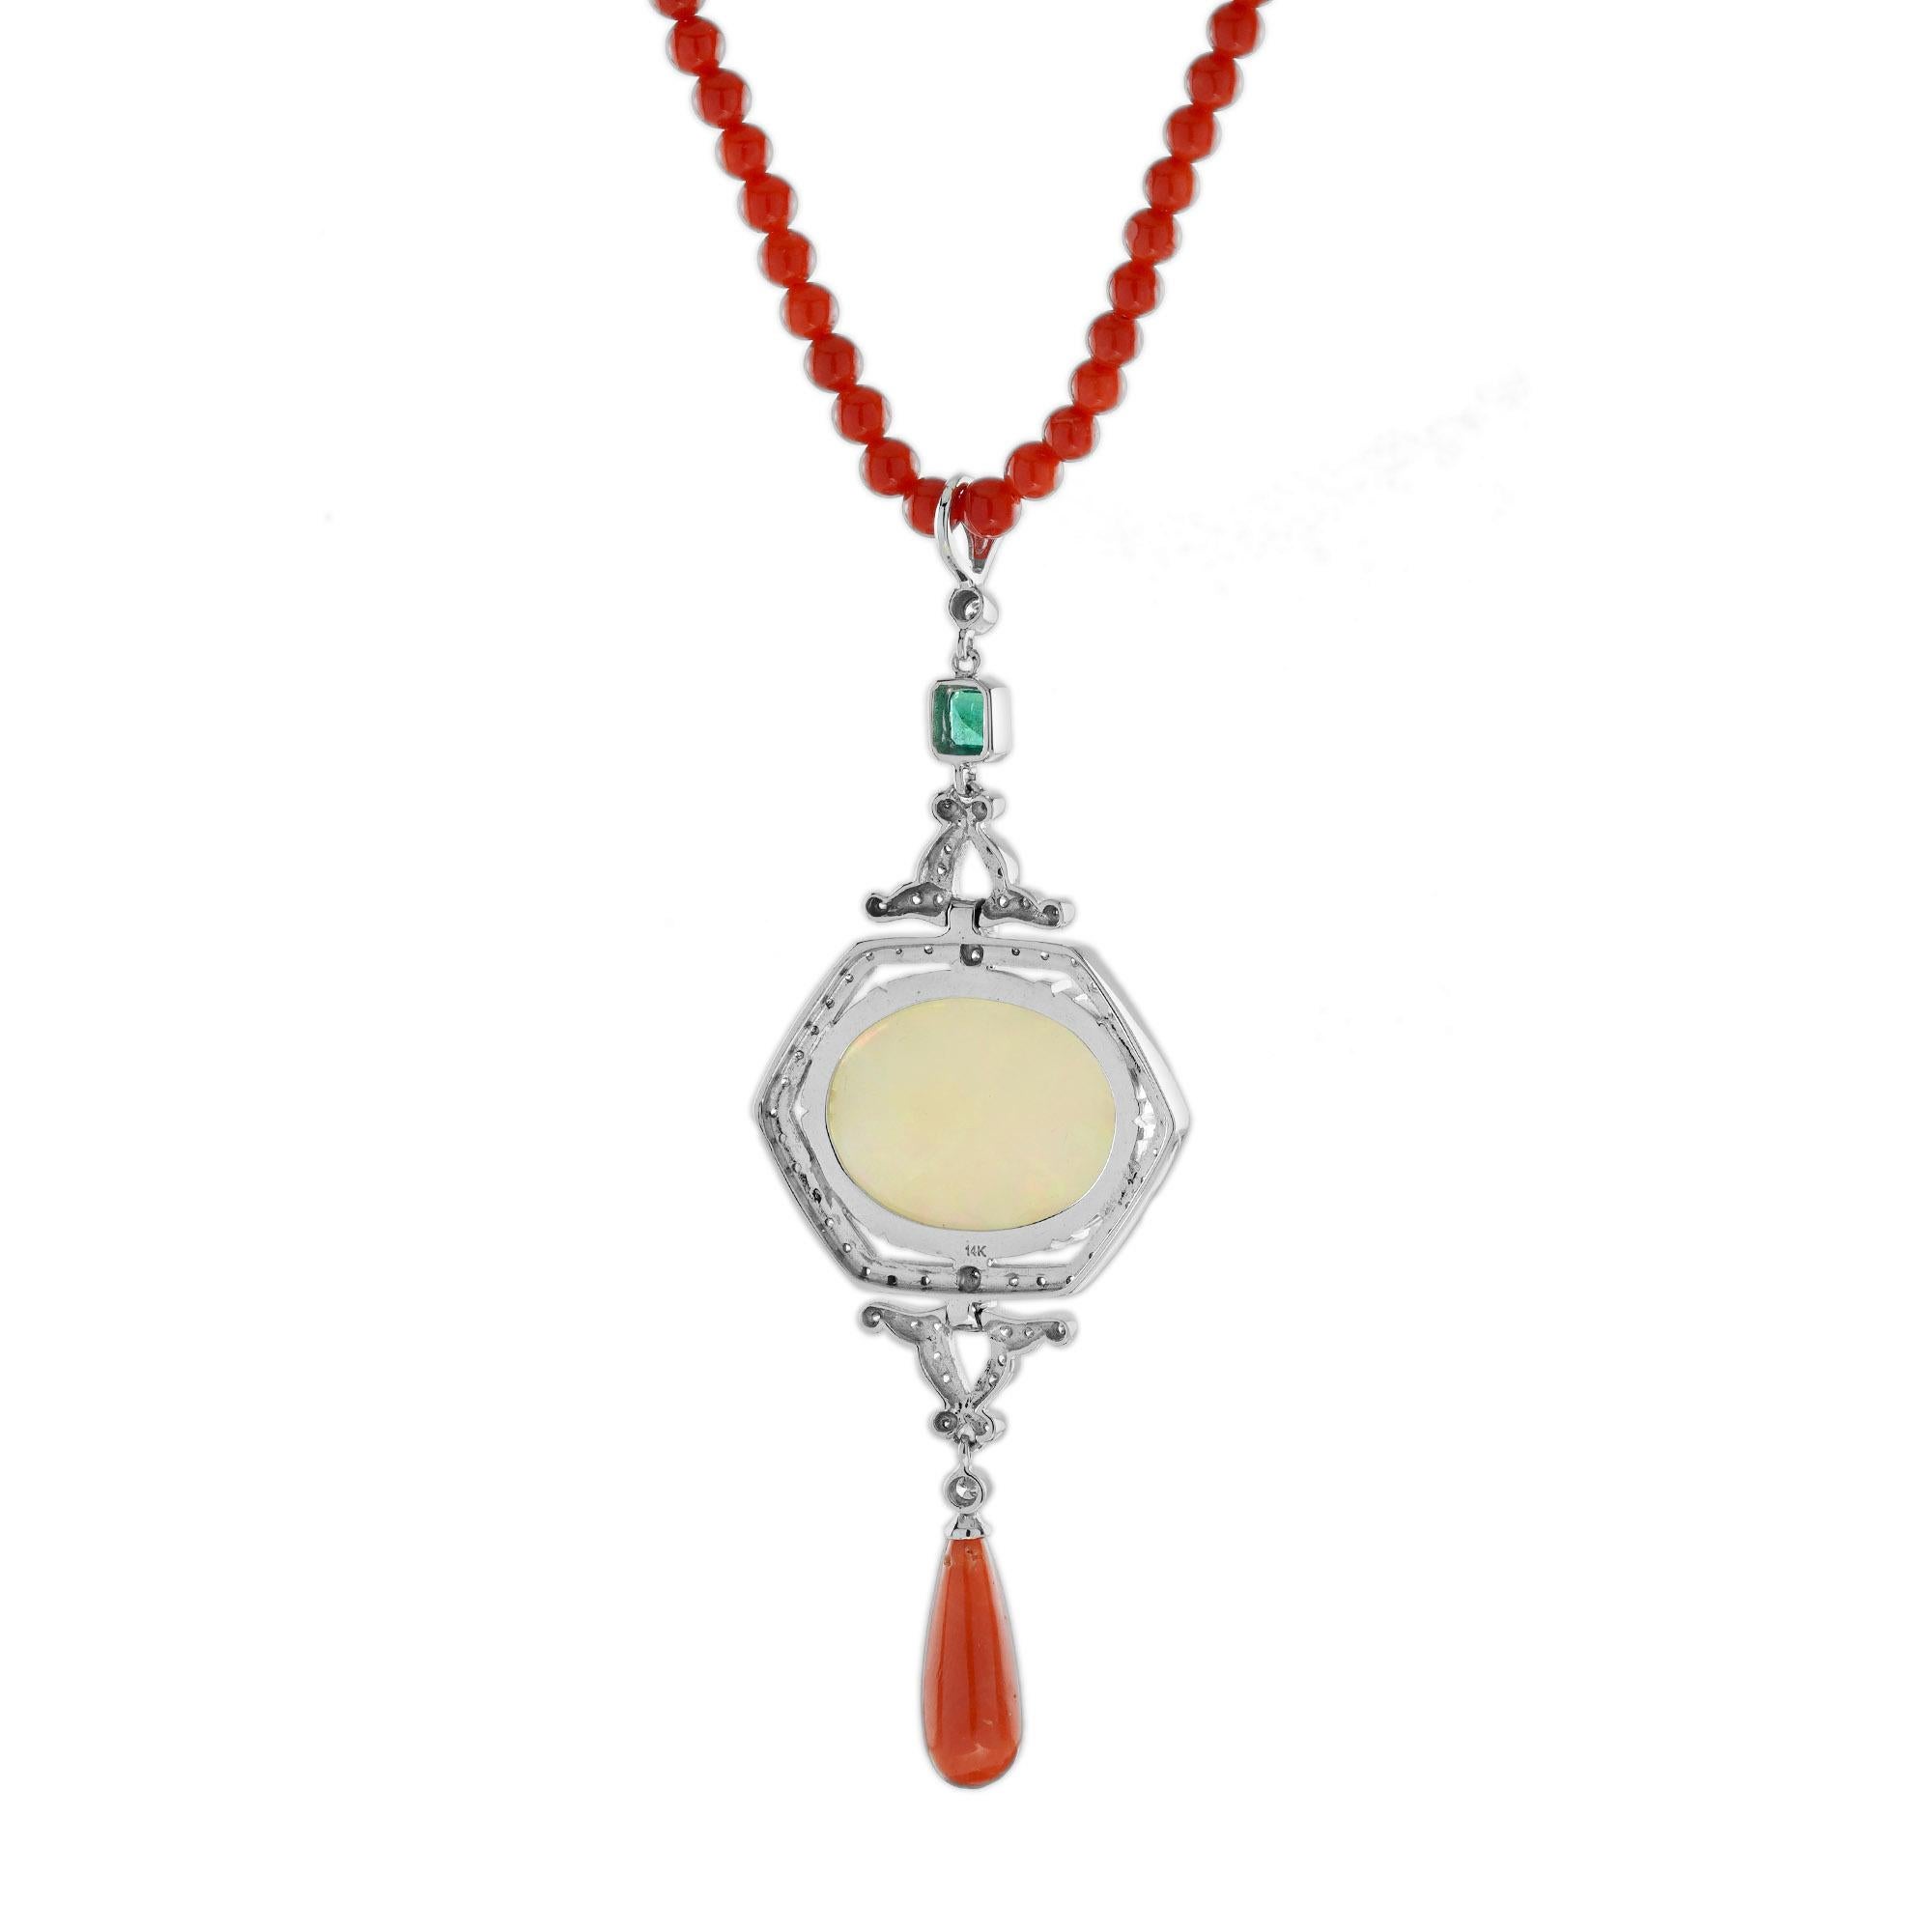 Oval Cut 12.42 Ct. Ethiopian Opal Coral Emerald Diamond Deco Style Necklace in 14K Gold